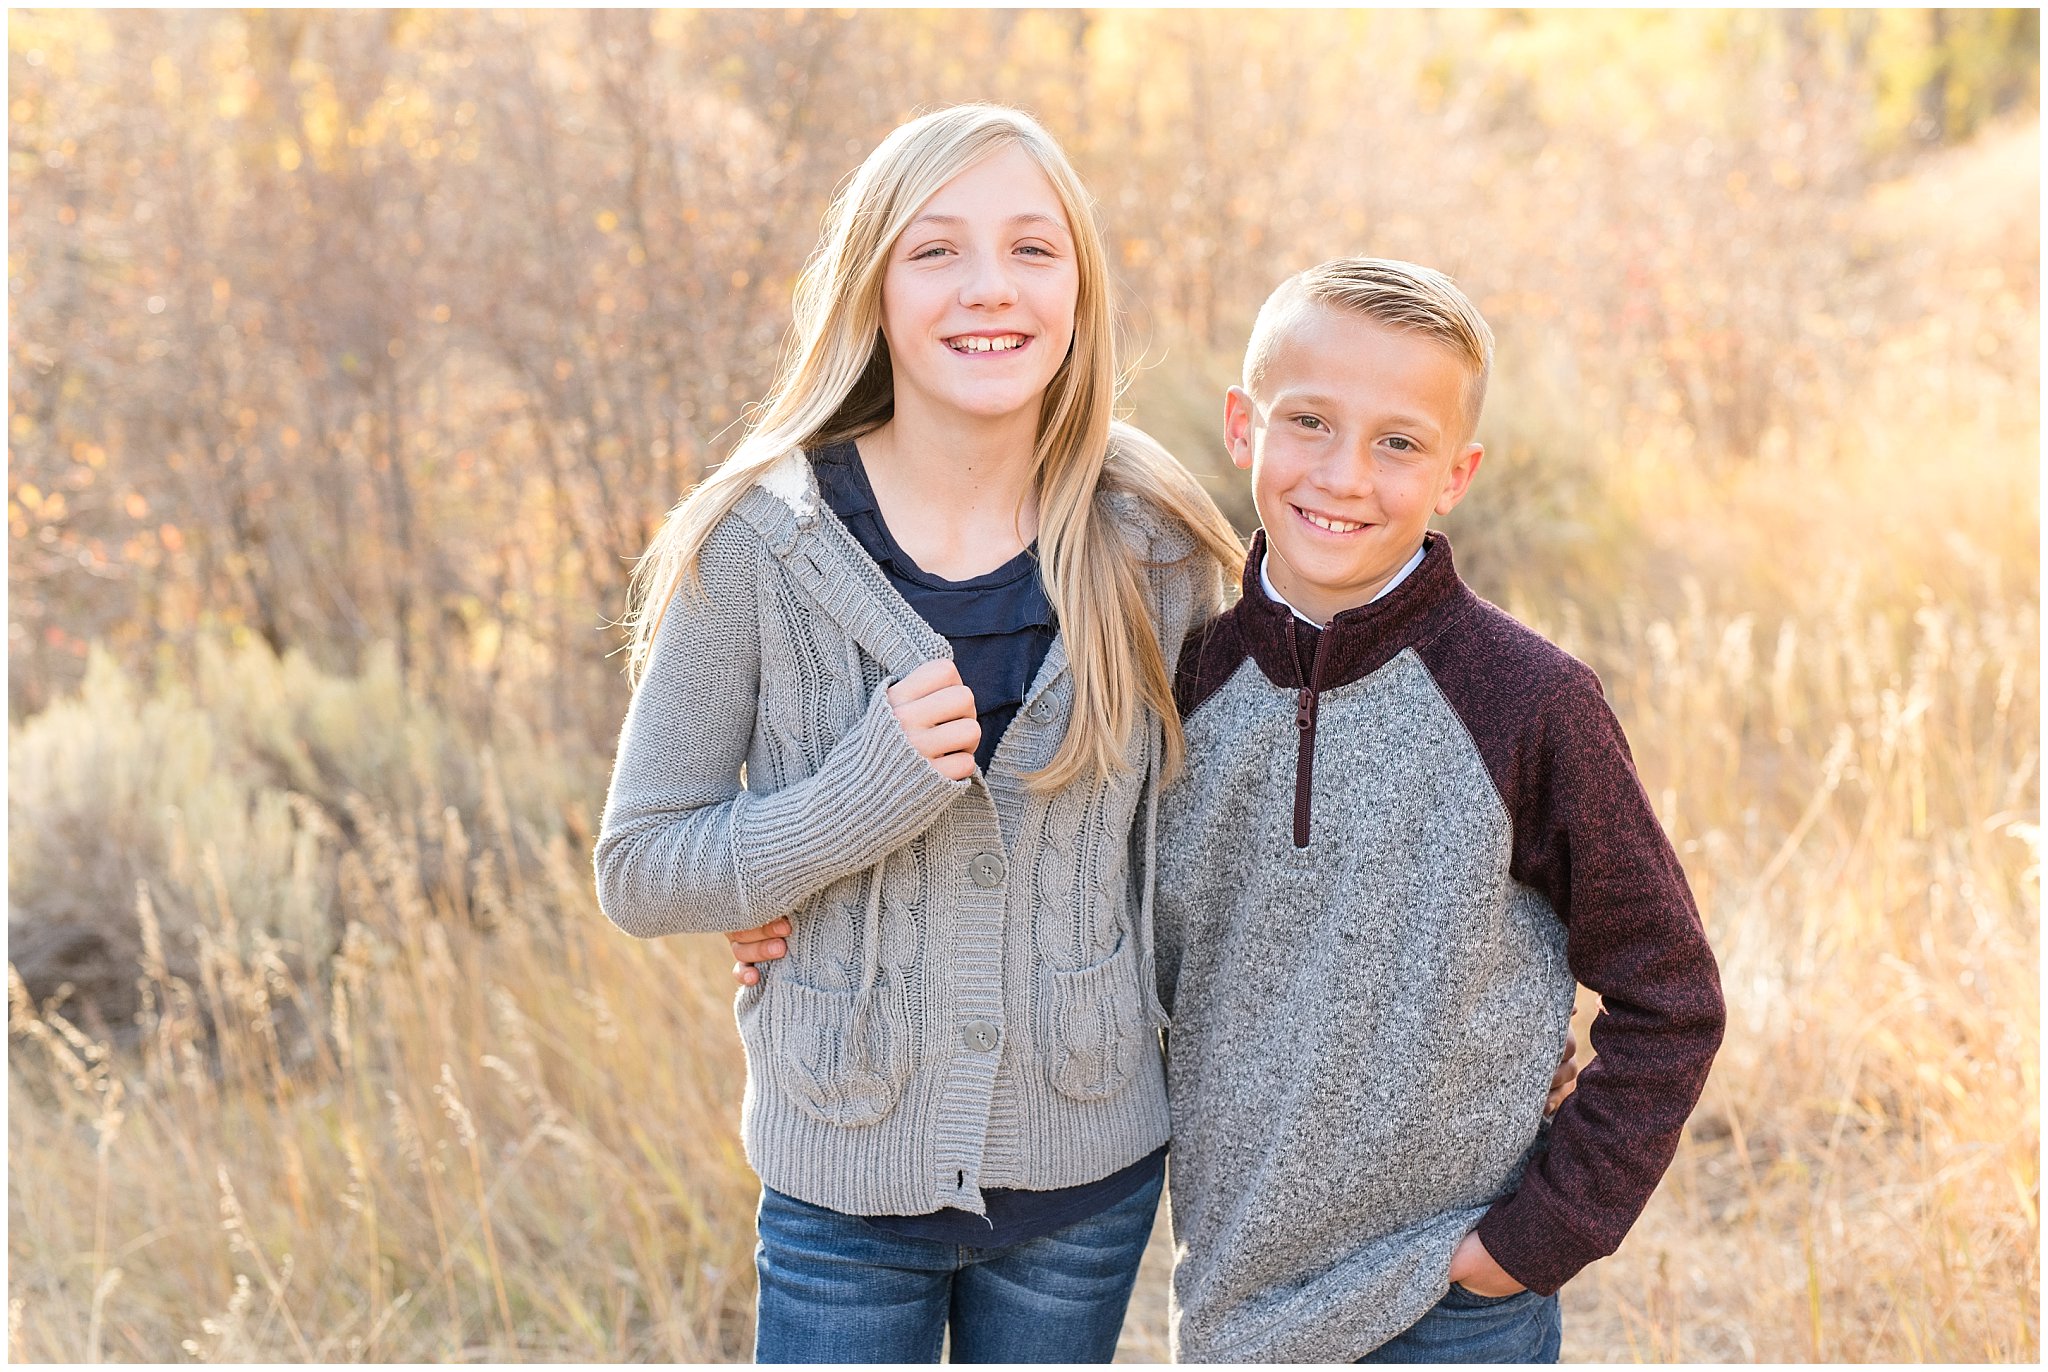 Brother and sister in the fall leaves | Fall family photo session at Snowbasin | Snowbasin Resort | Jessie and Dallin Photography